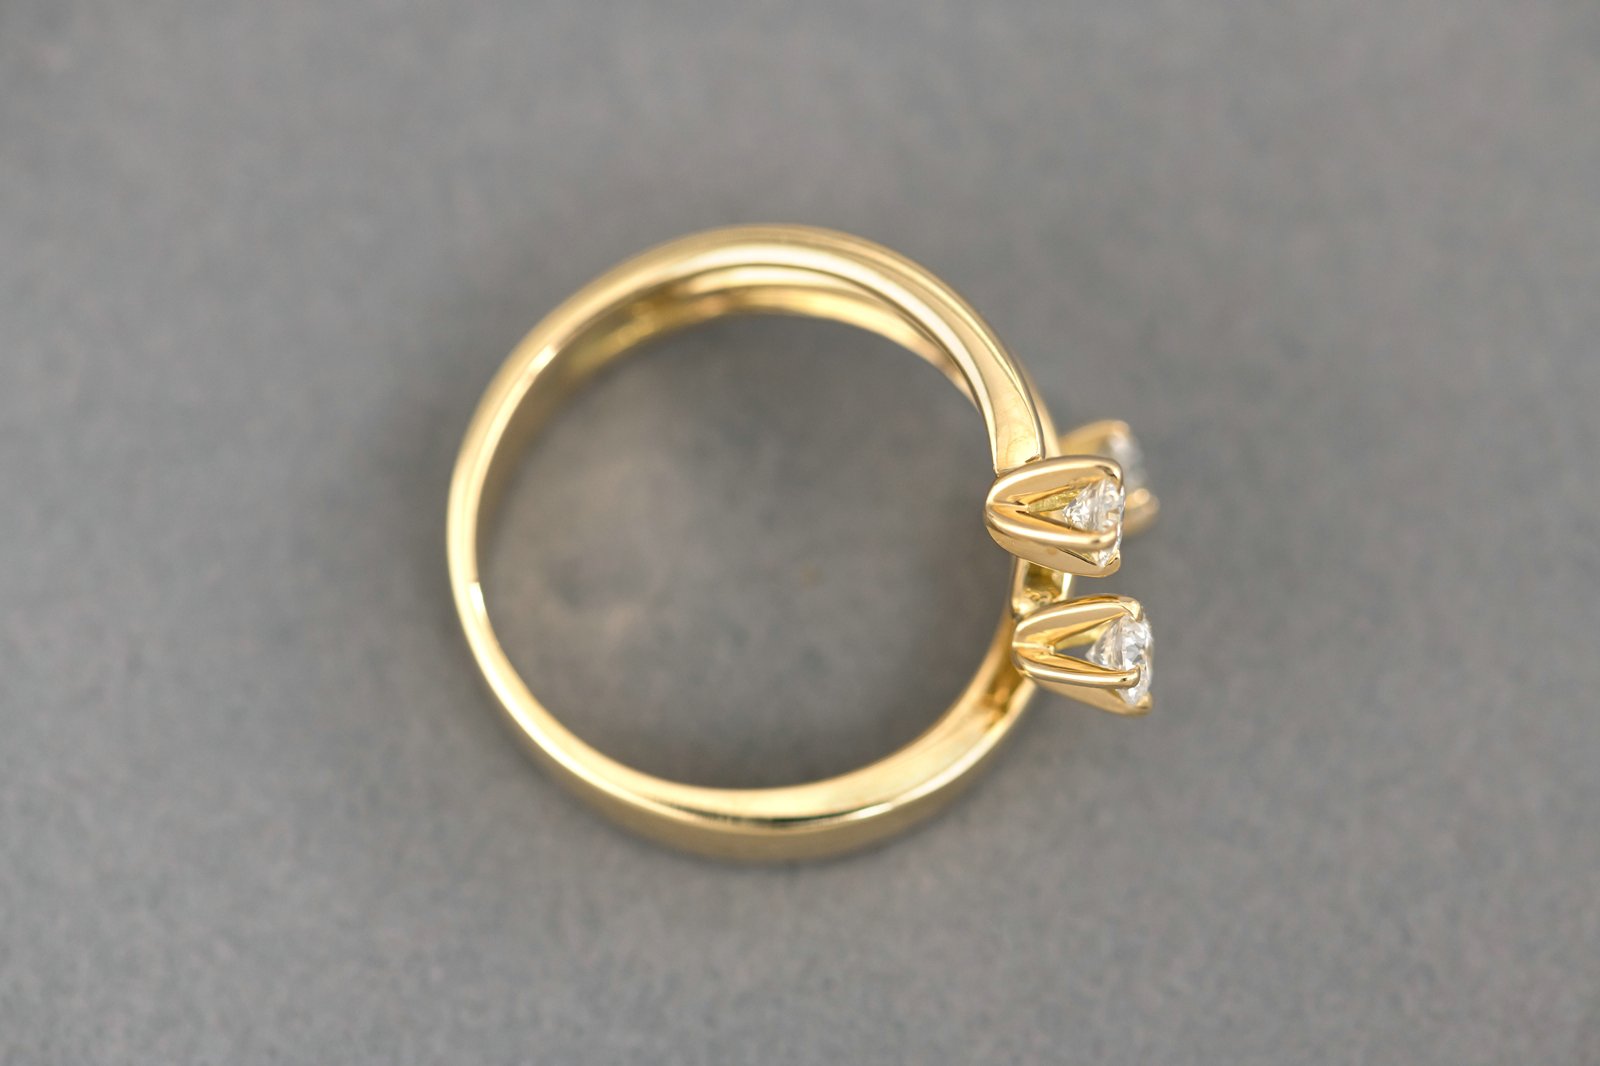 "CROISE" RING - Image 3 of 3